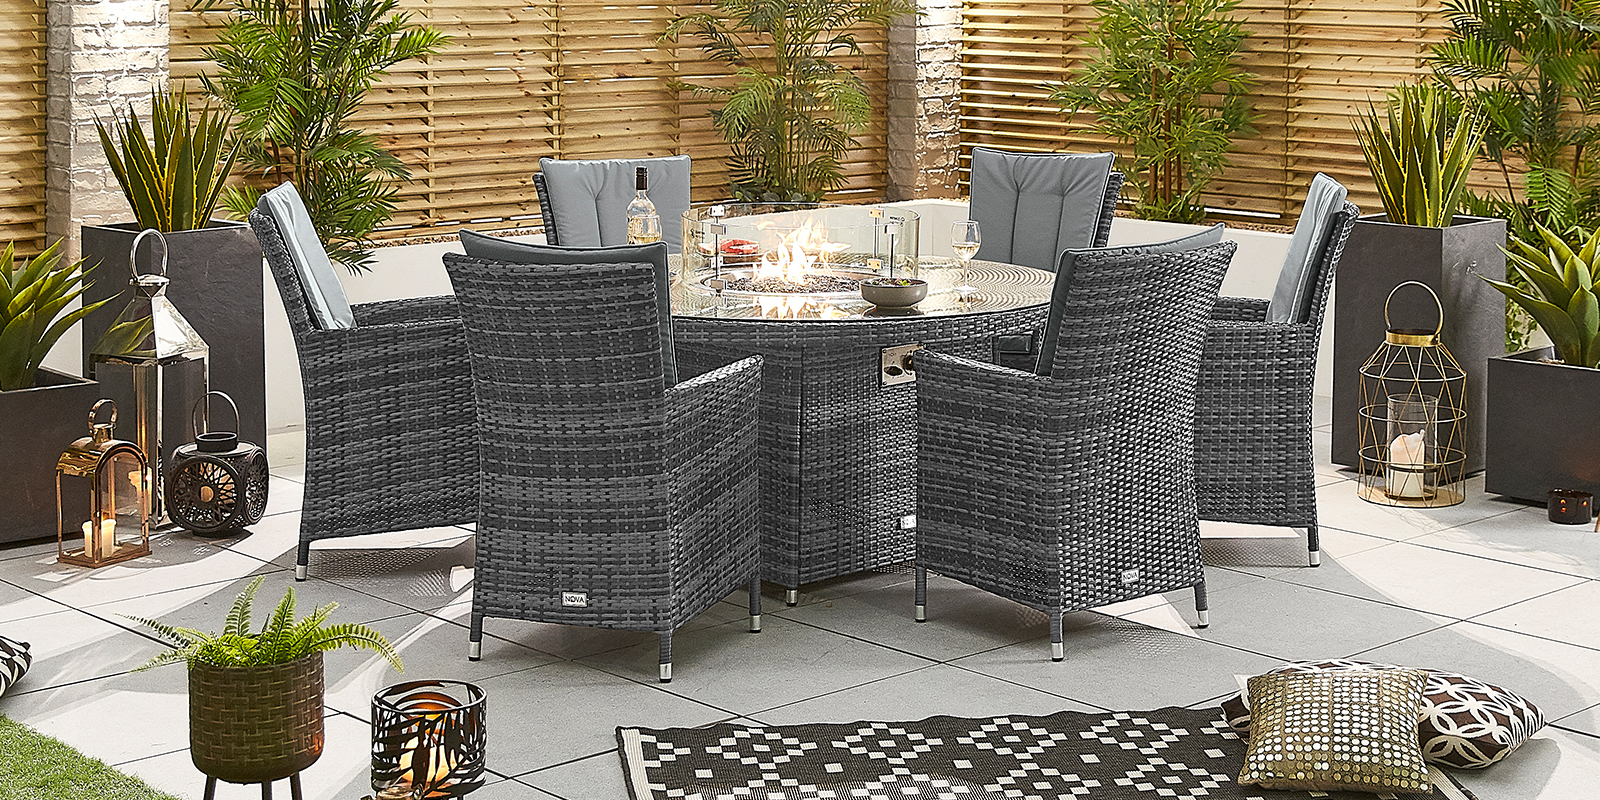 What to Do with Your Rattan Garden Furniture in Bad Weather